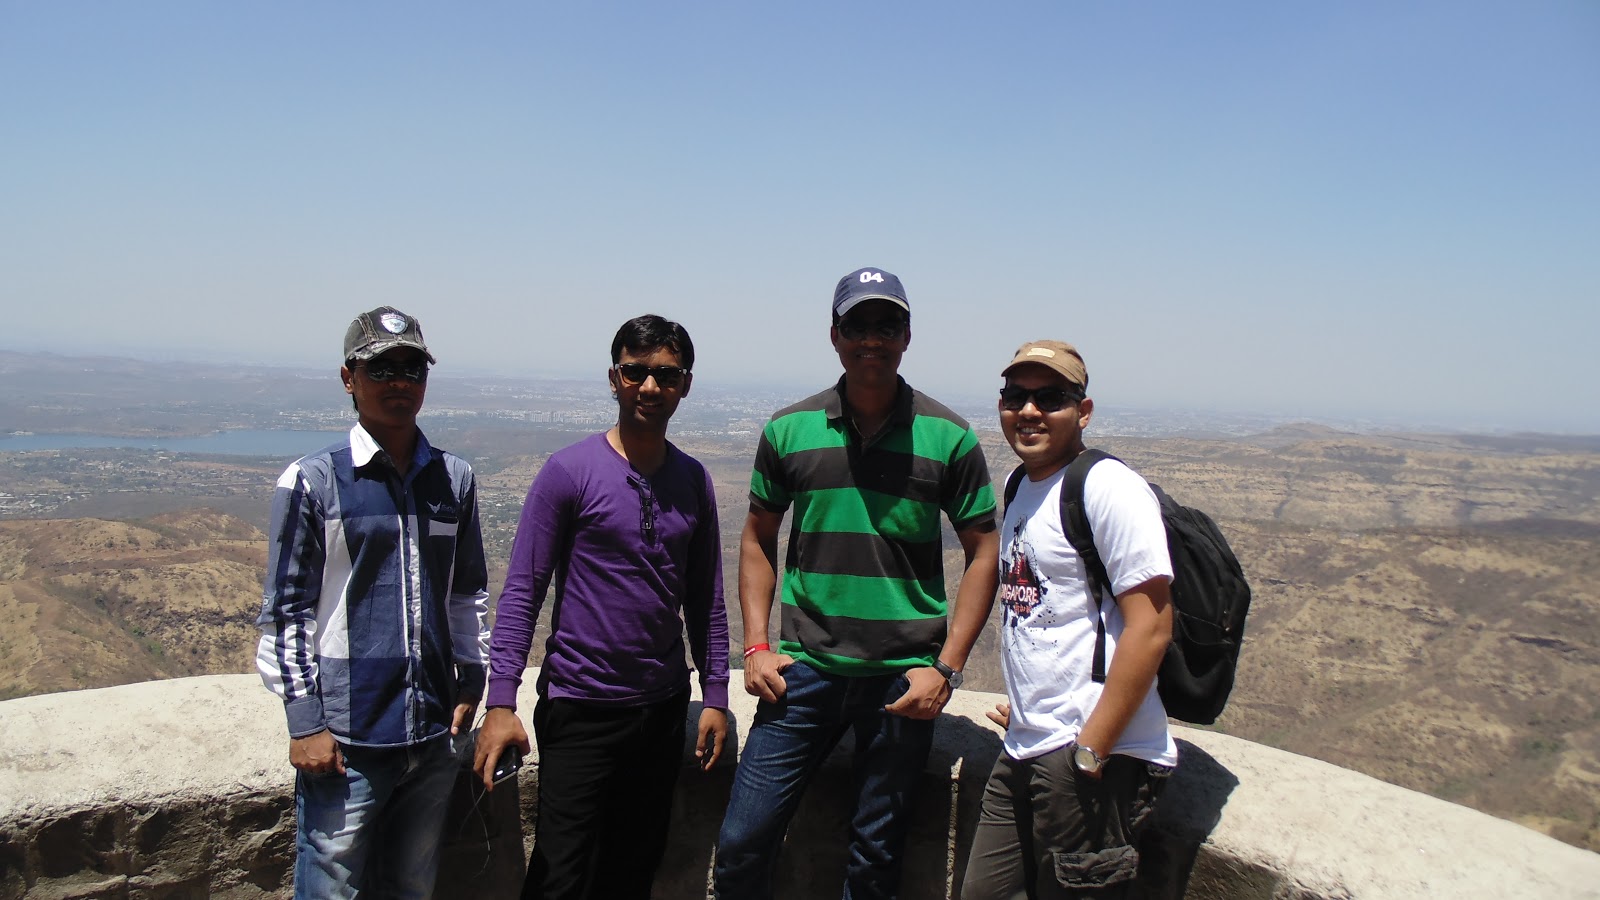 A short bike ride to Sinhagad Fort from Pune